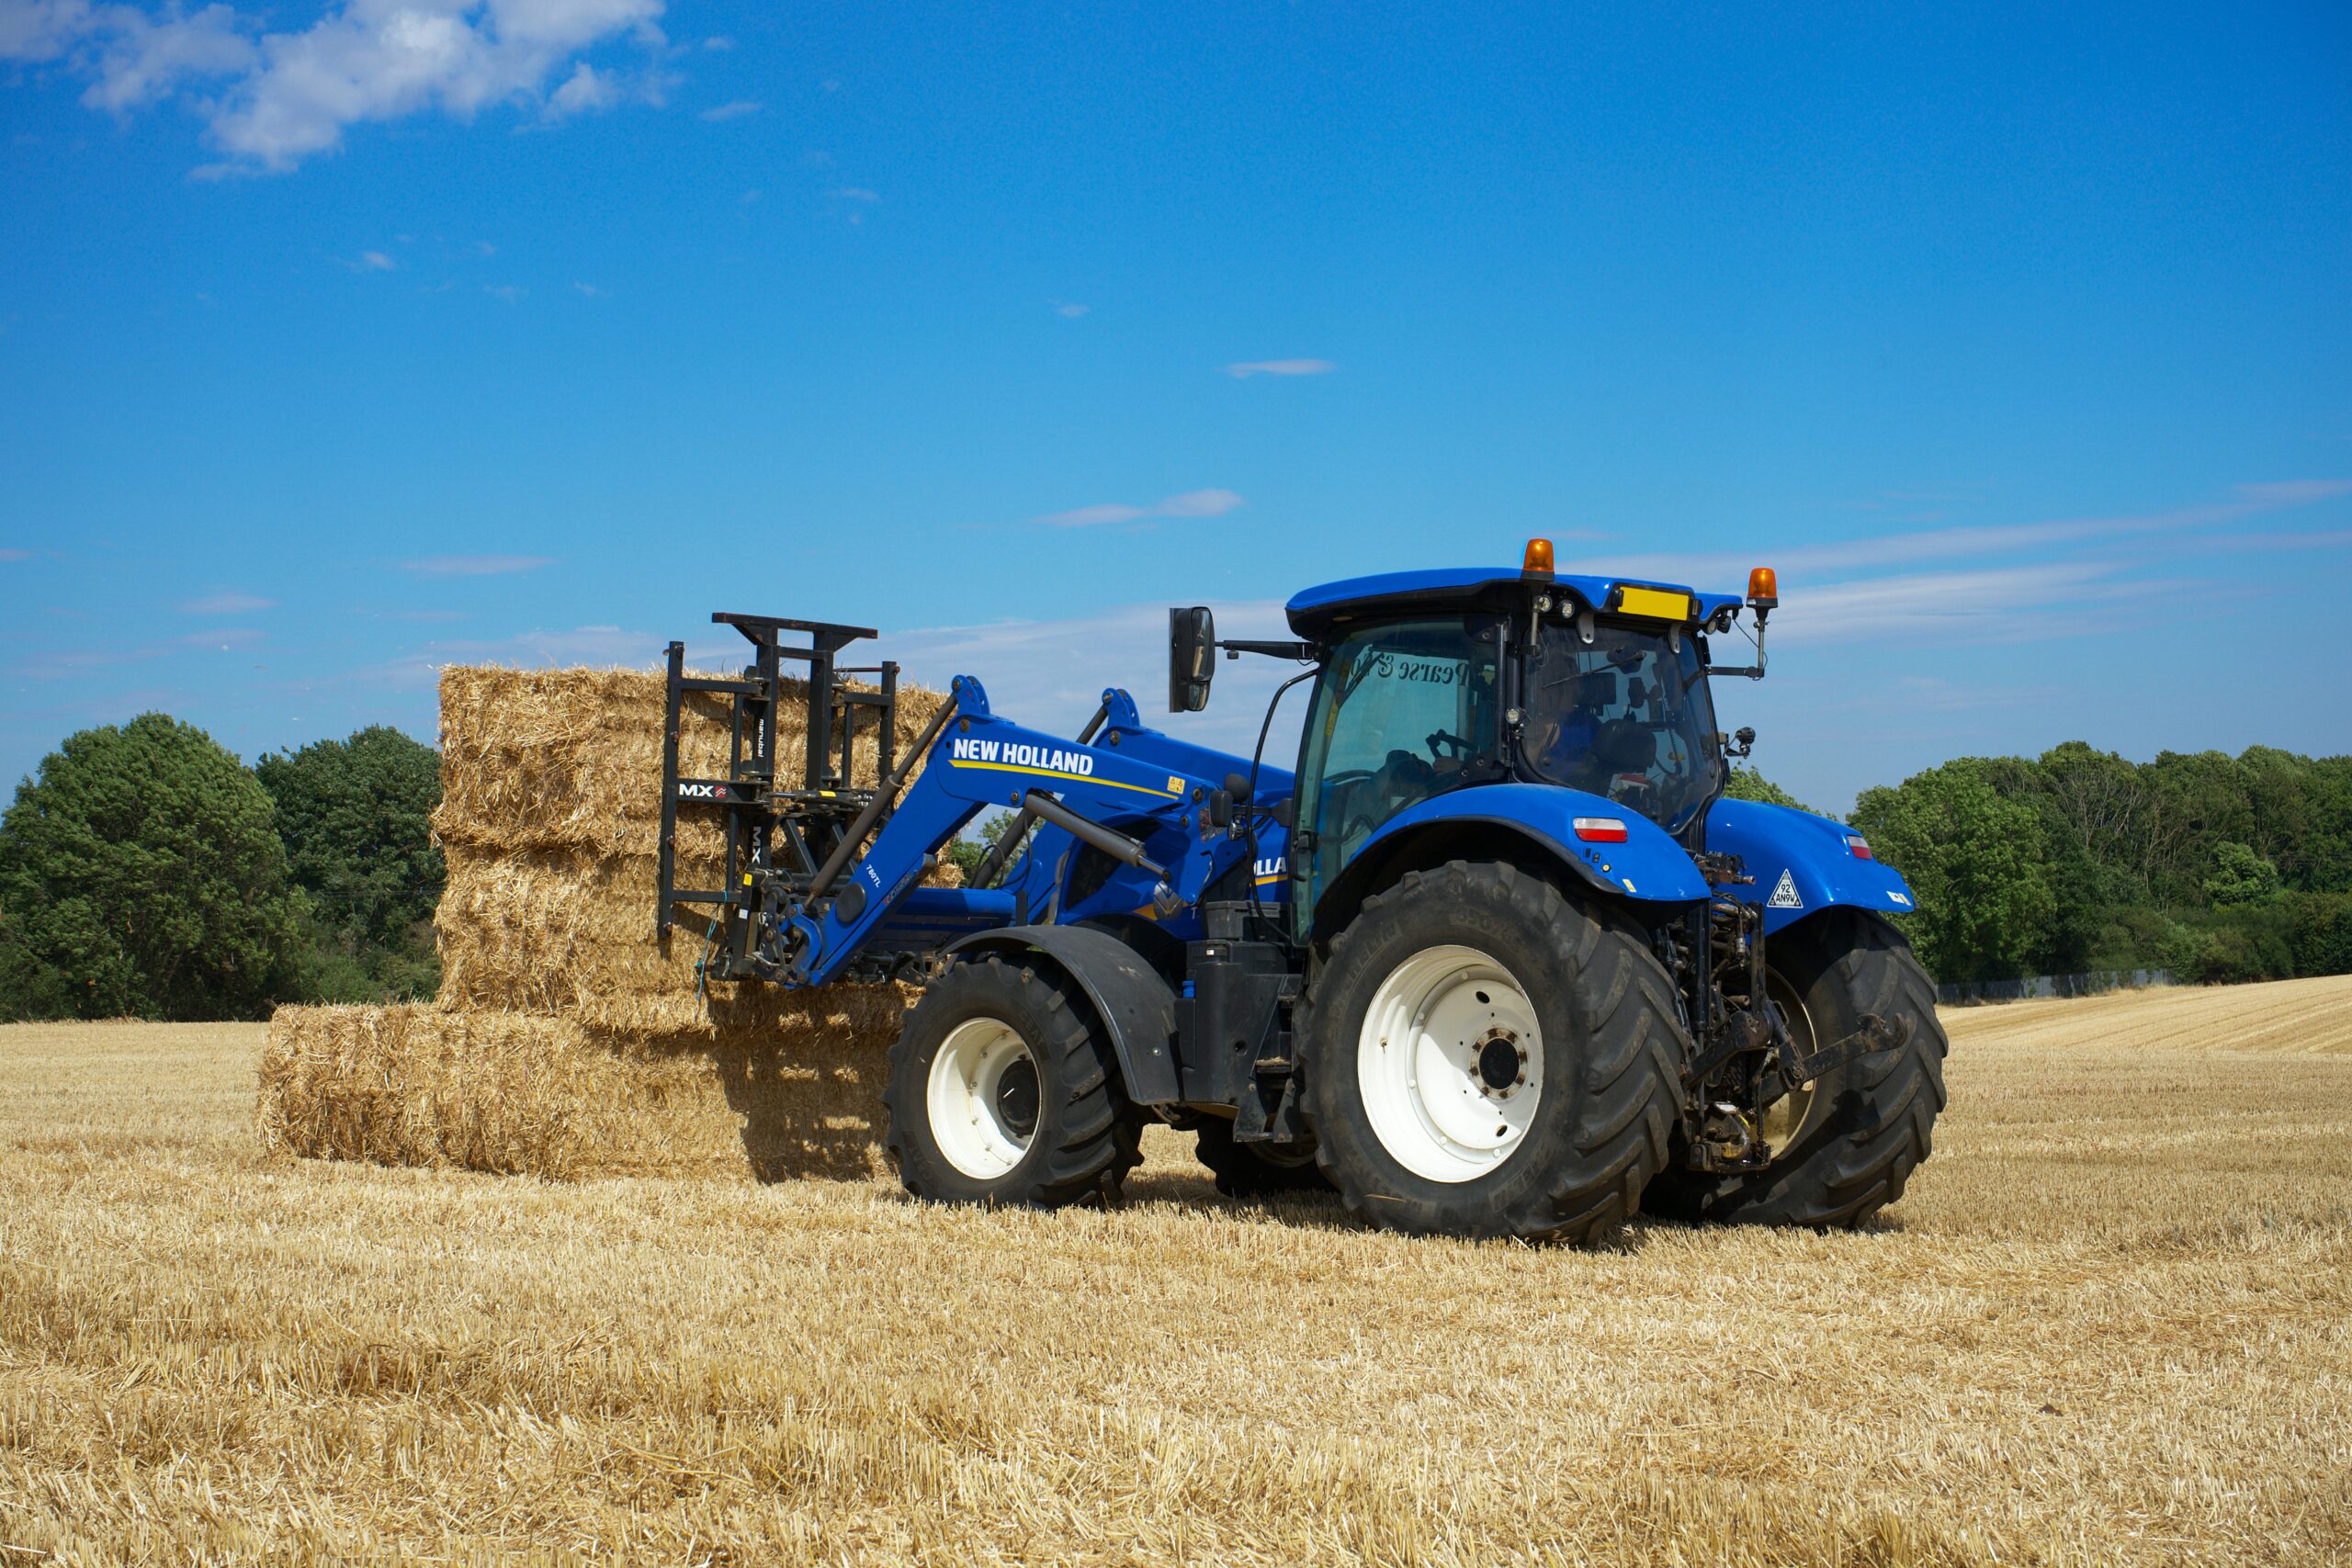 7 Mistakes to Avoid When Selling Used Farm Equipment